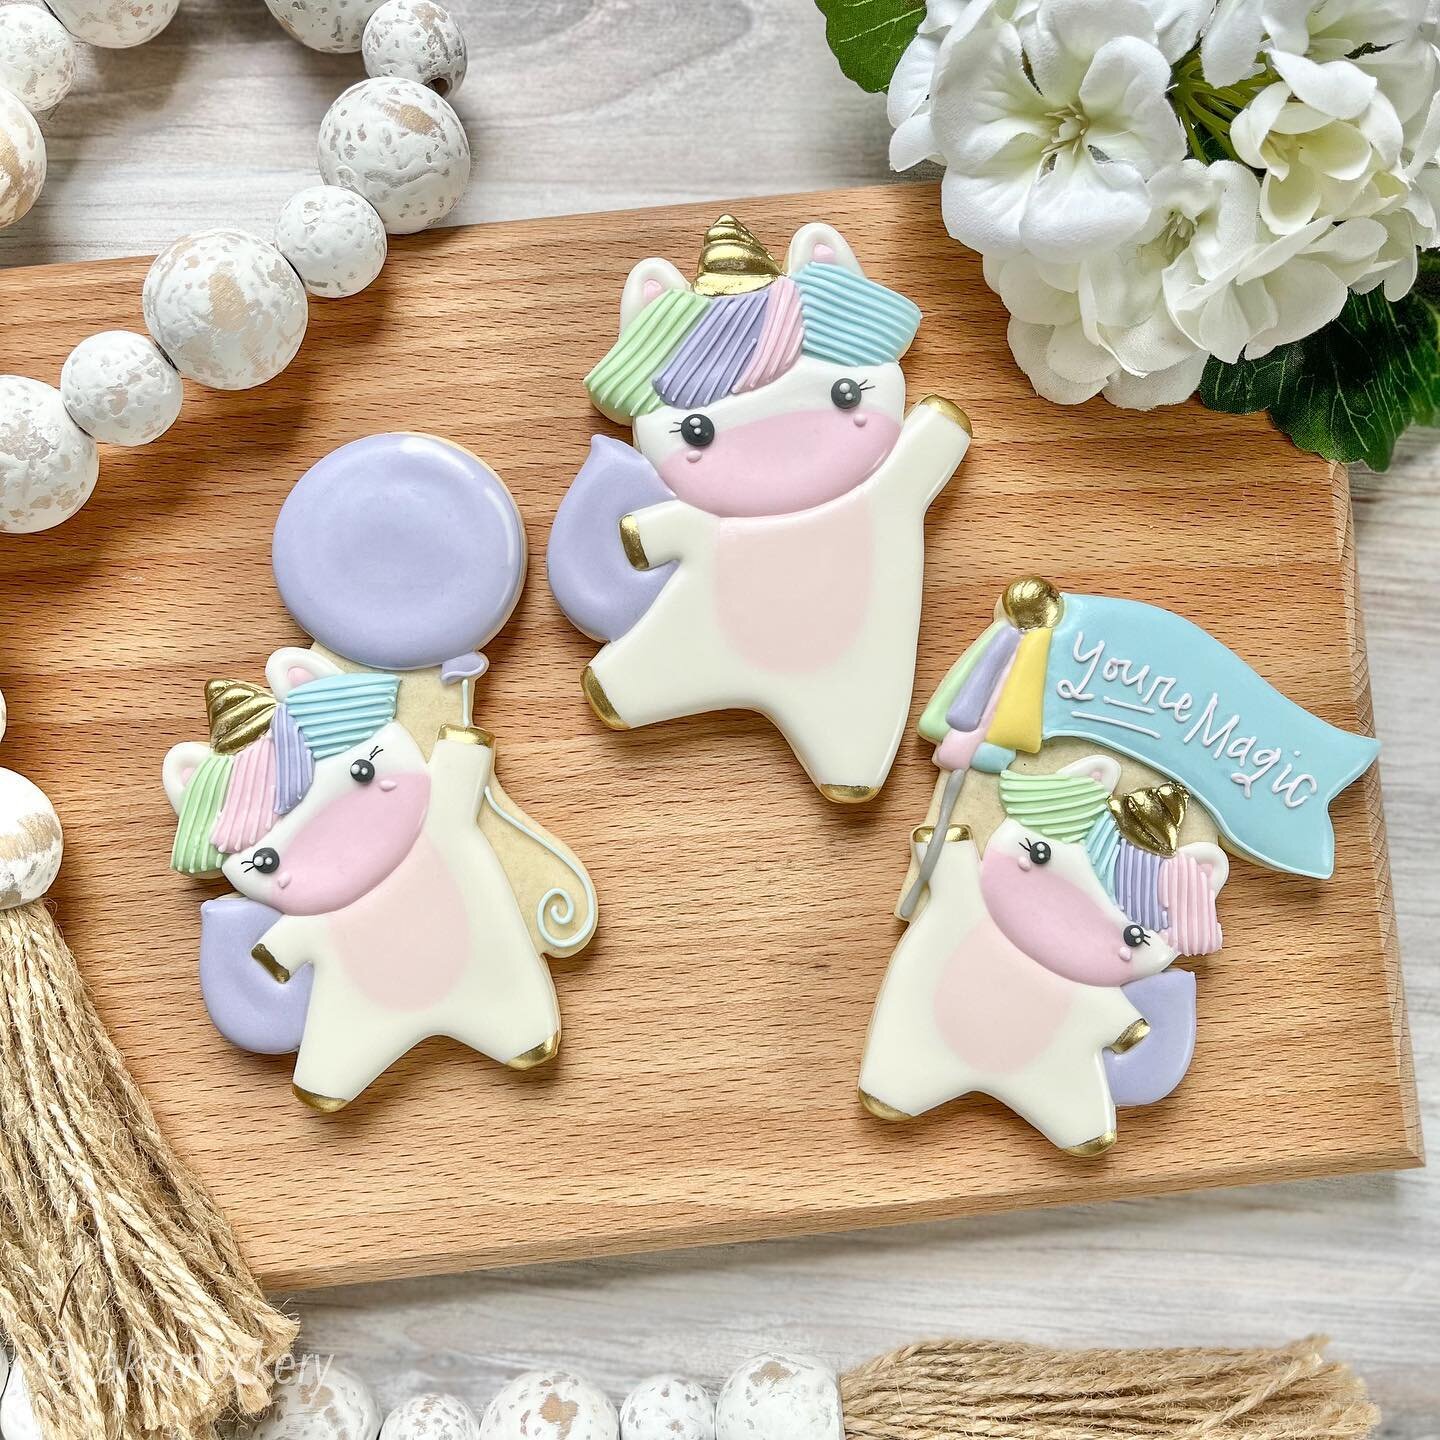 Most every little girl that I have encountered has/have had a love for unicorns.  These magical unicorns are from @kaleidacuts and would be a great favor for any unicorn themed birthday party!!!